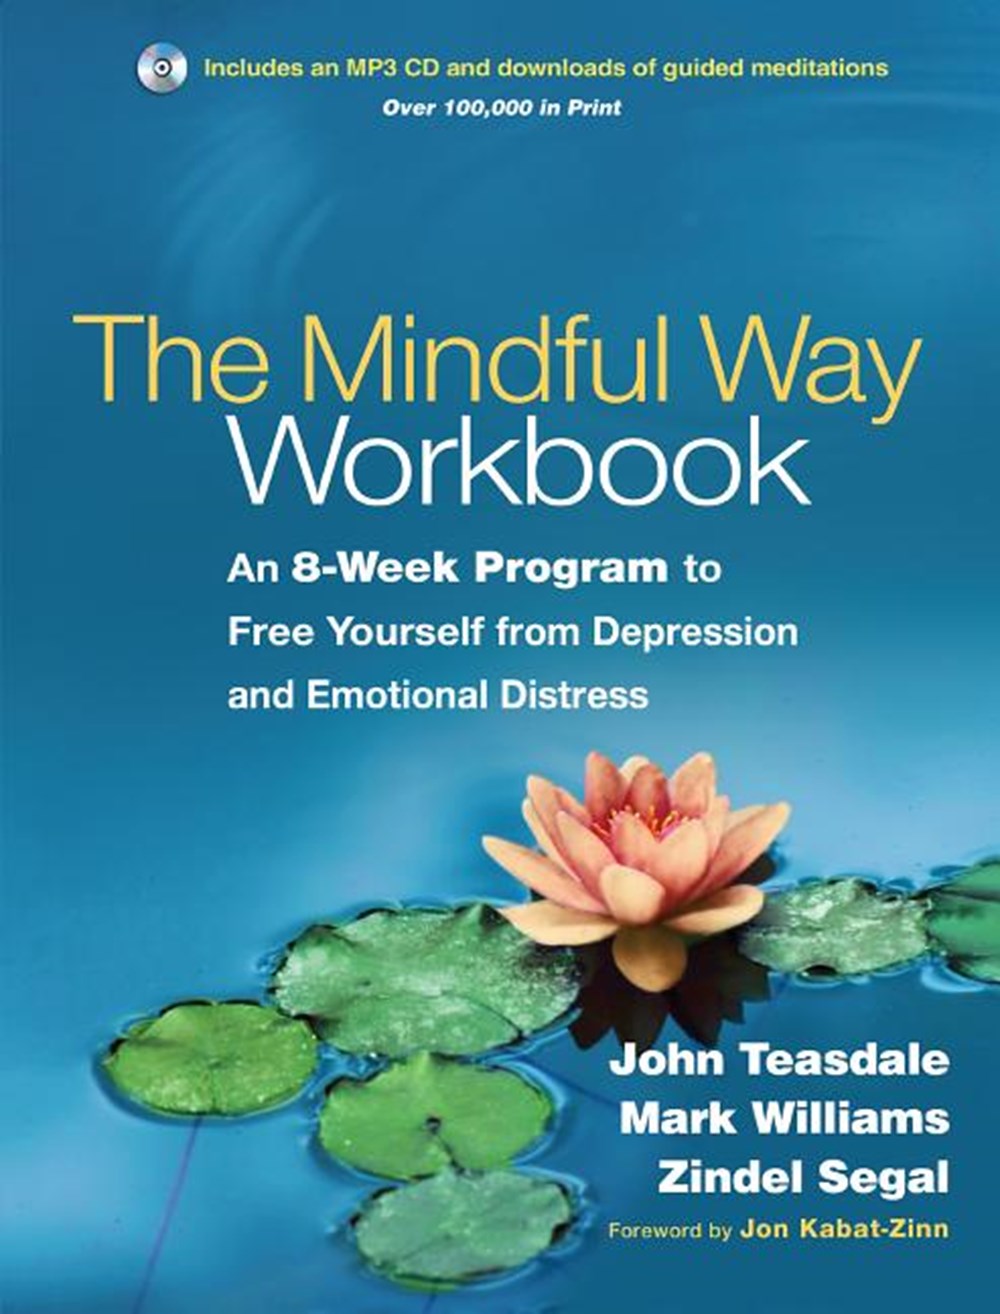 Mindful Way Workbook: An 8-Week Program to Free Yourself from Depression and Emotional Distress